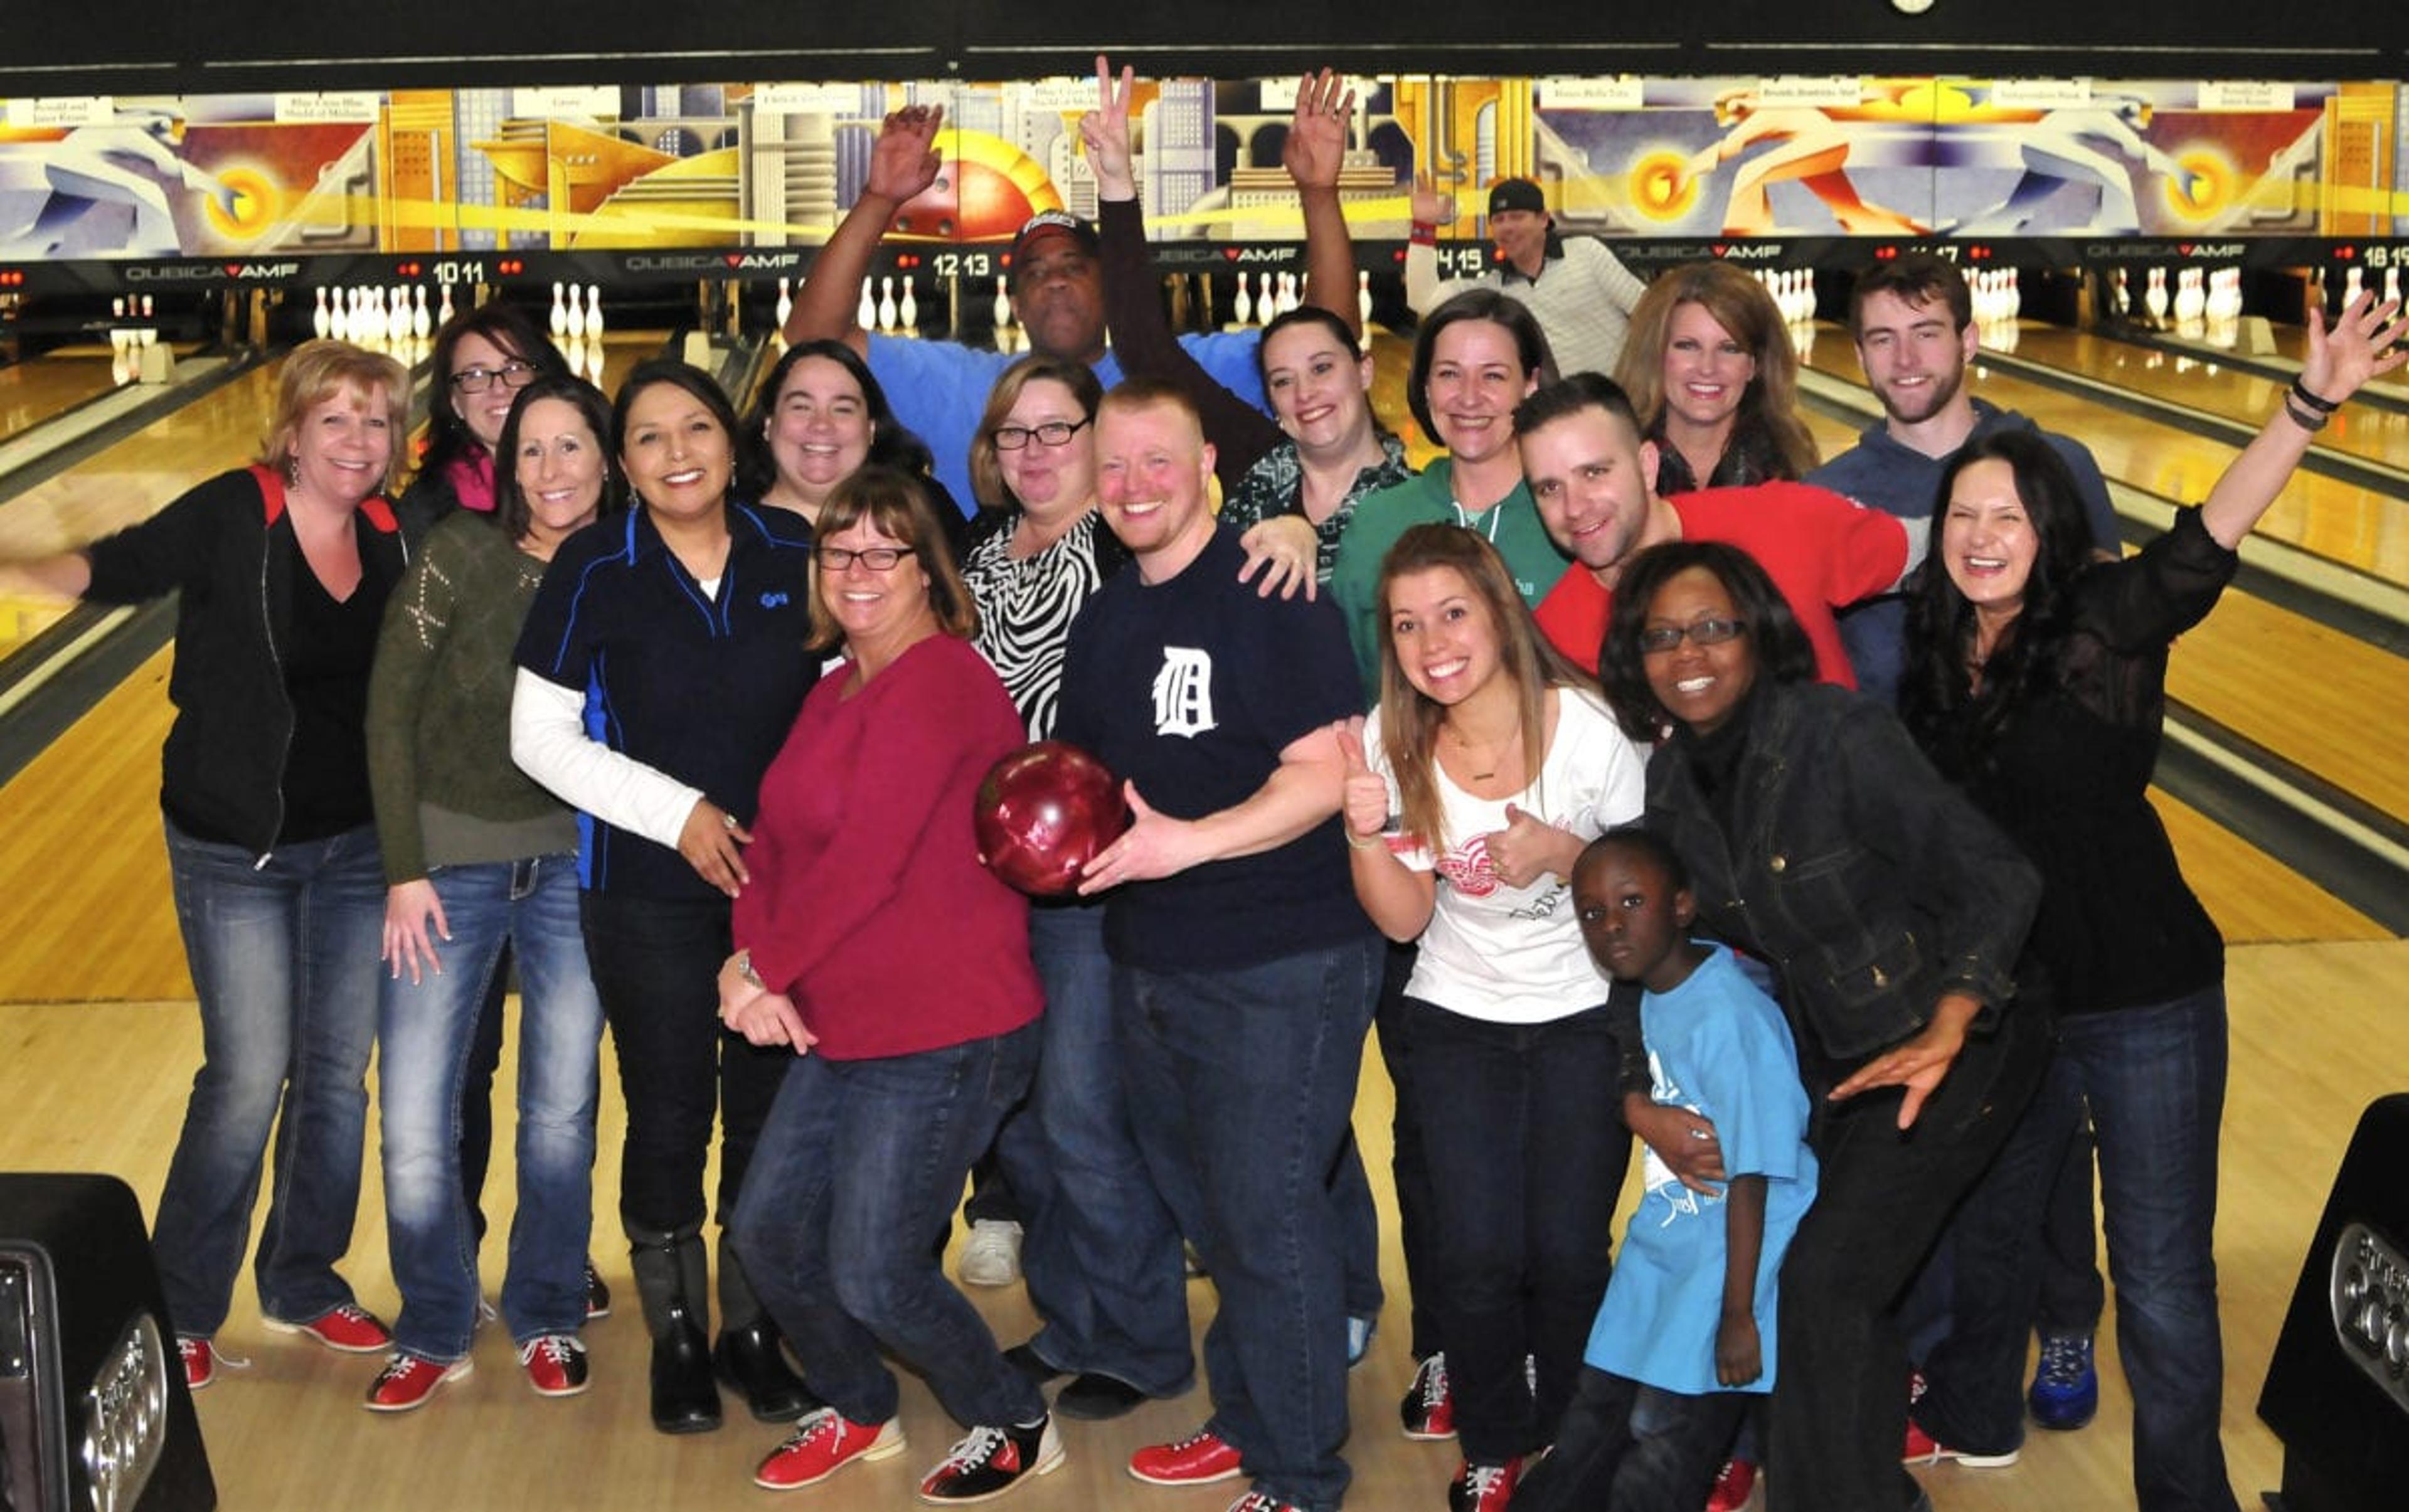 Grand Rapids employees recently packed the Eastbrook Lanes on March 6 and 7, raising $3,555 toward the local BBBS chapter.  